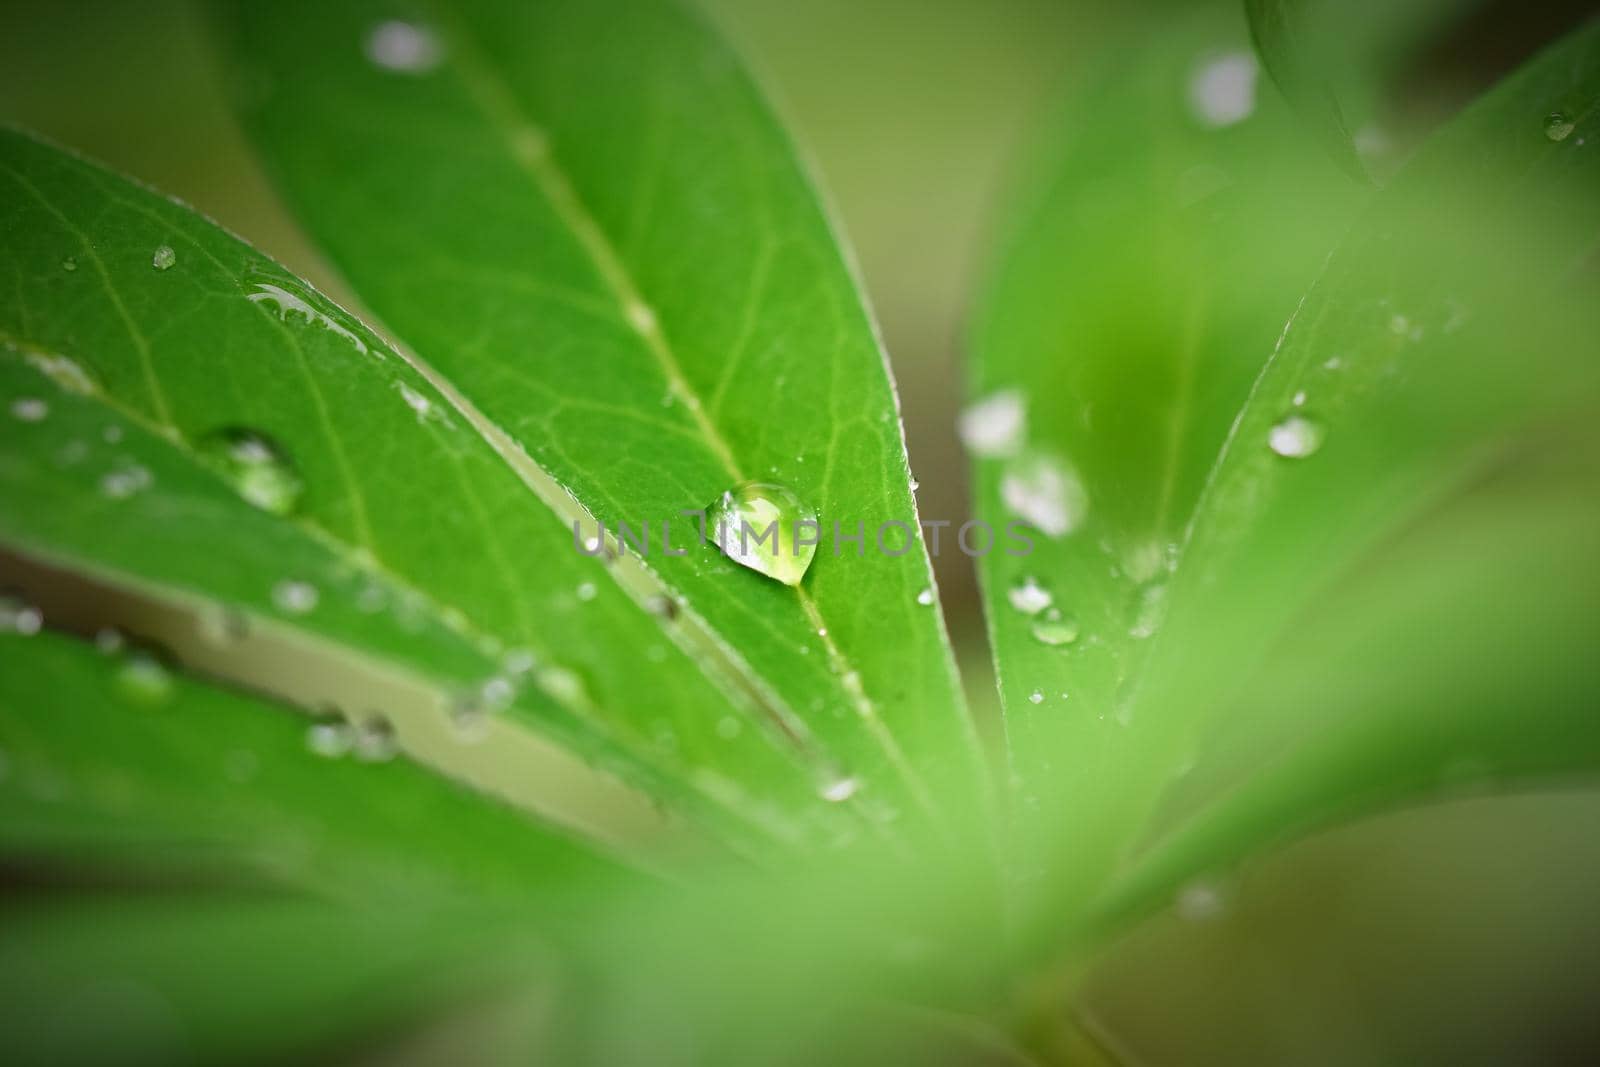 Waterdrops on a lupine leaf as a close up by Luise123